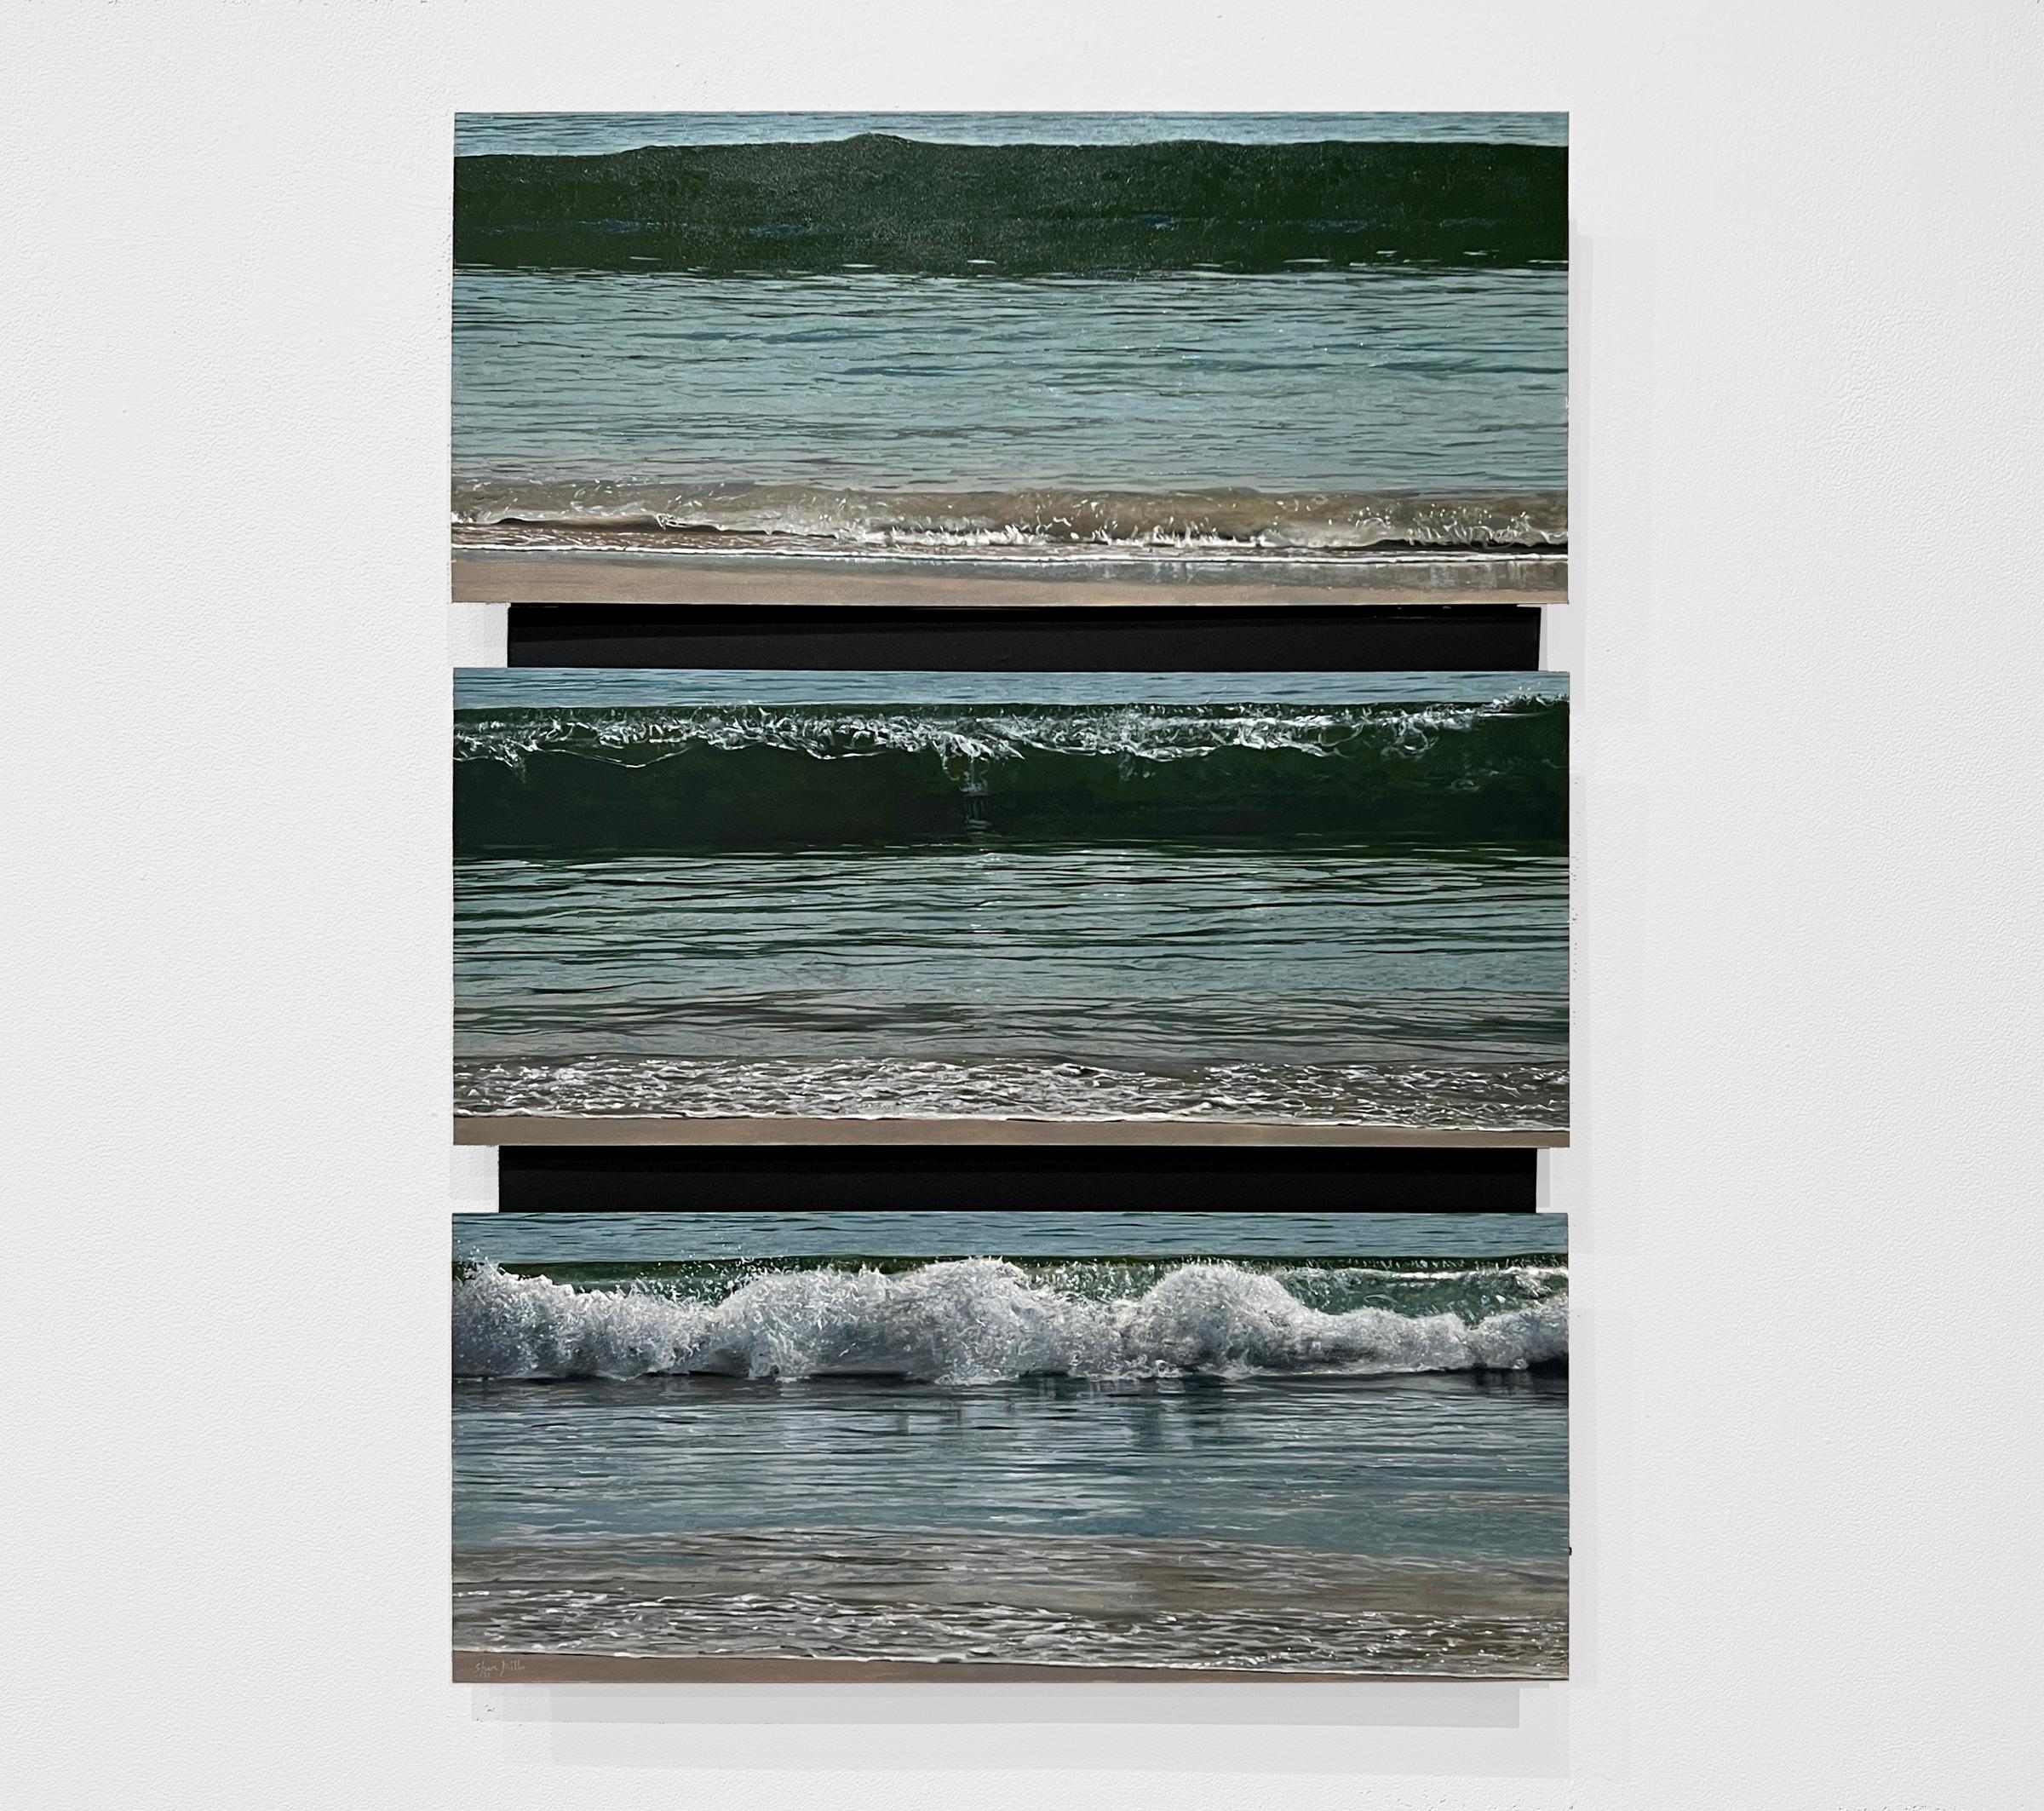 OCEAN SWELL - Seascape / Multi-Panel / Crashing Waves / Photorealism - Painting by Steve Mills